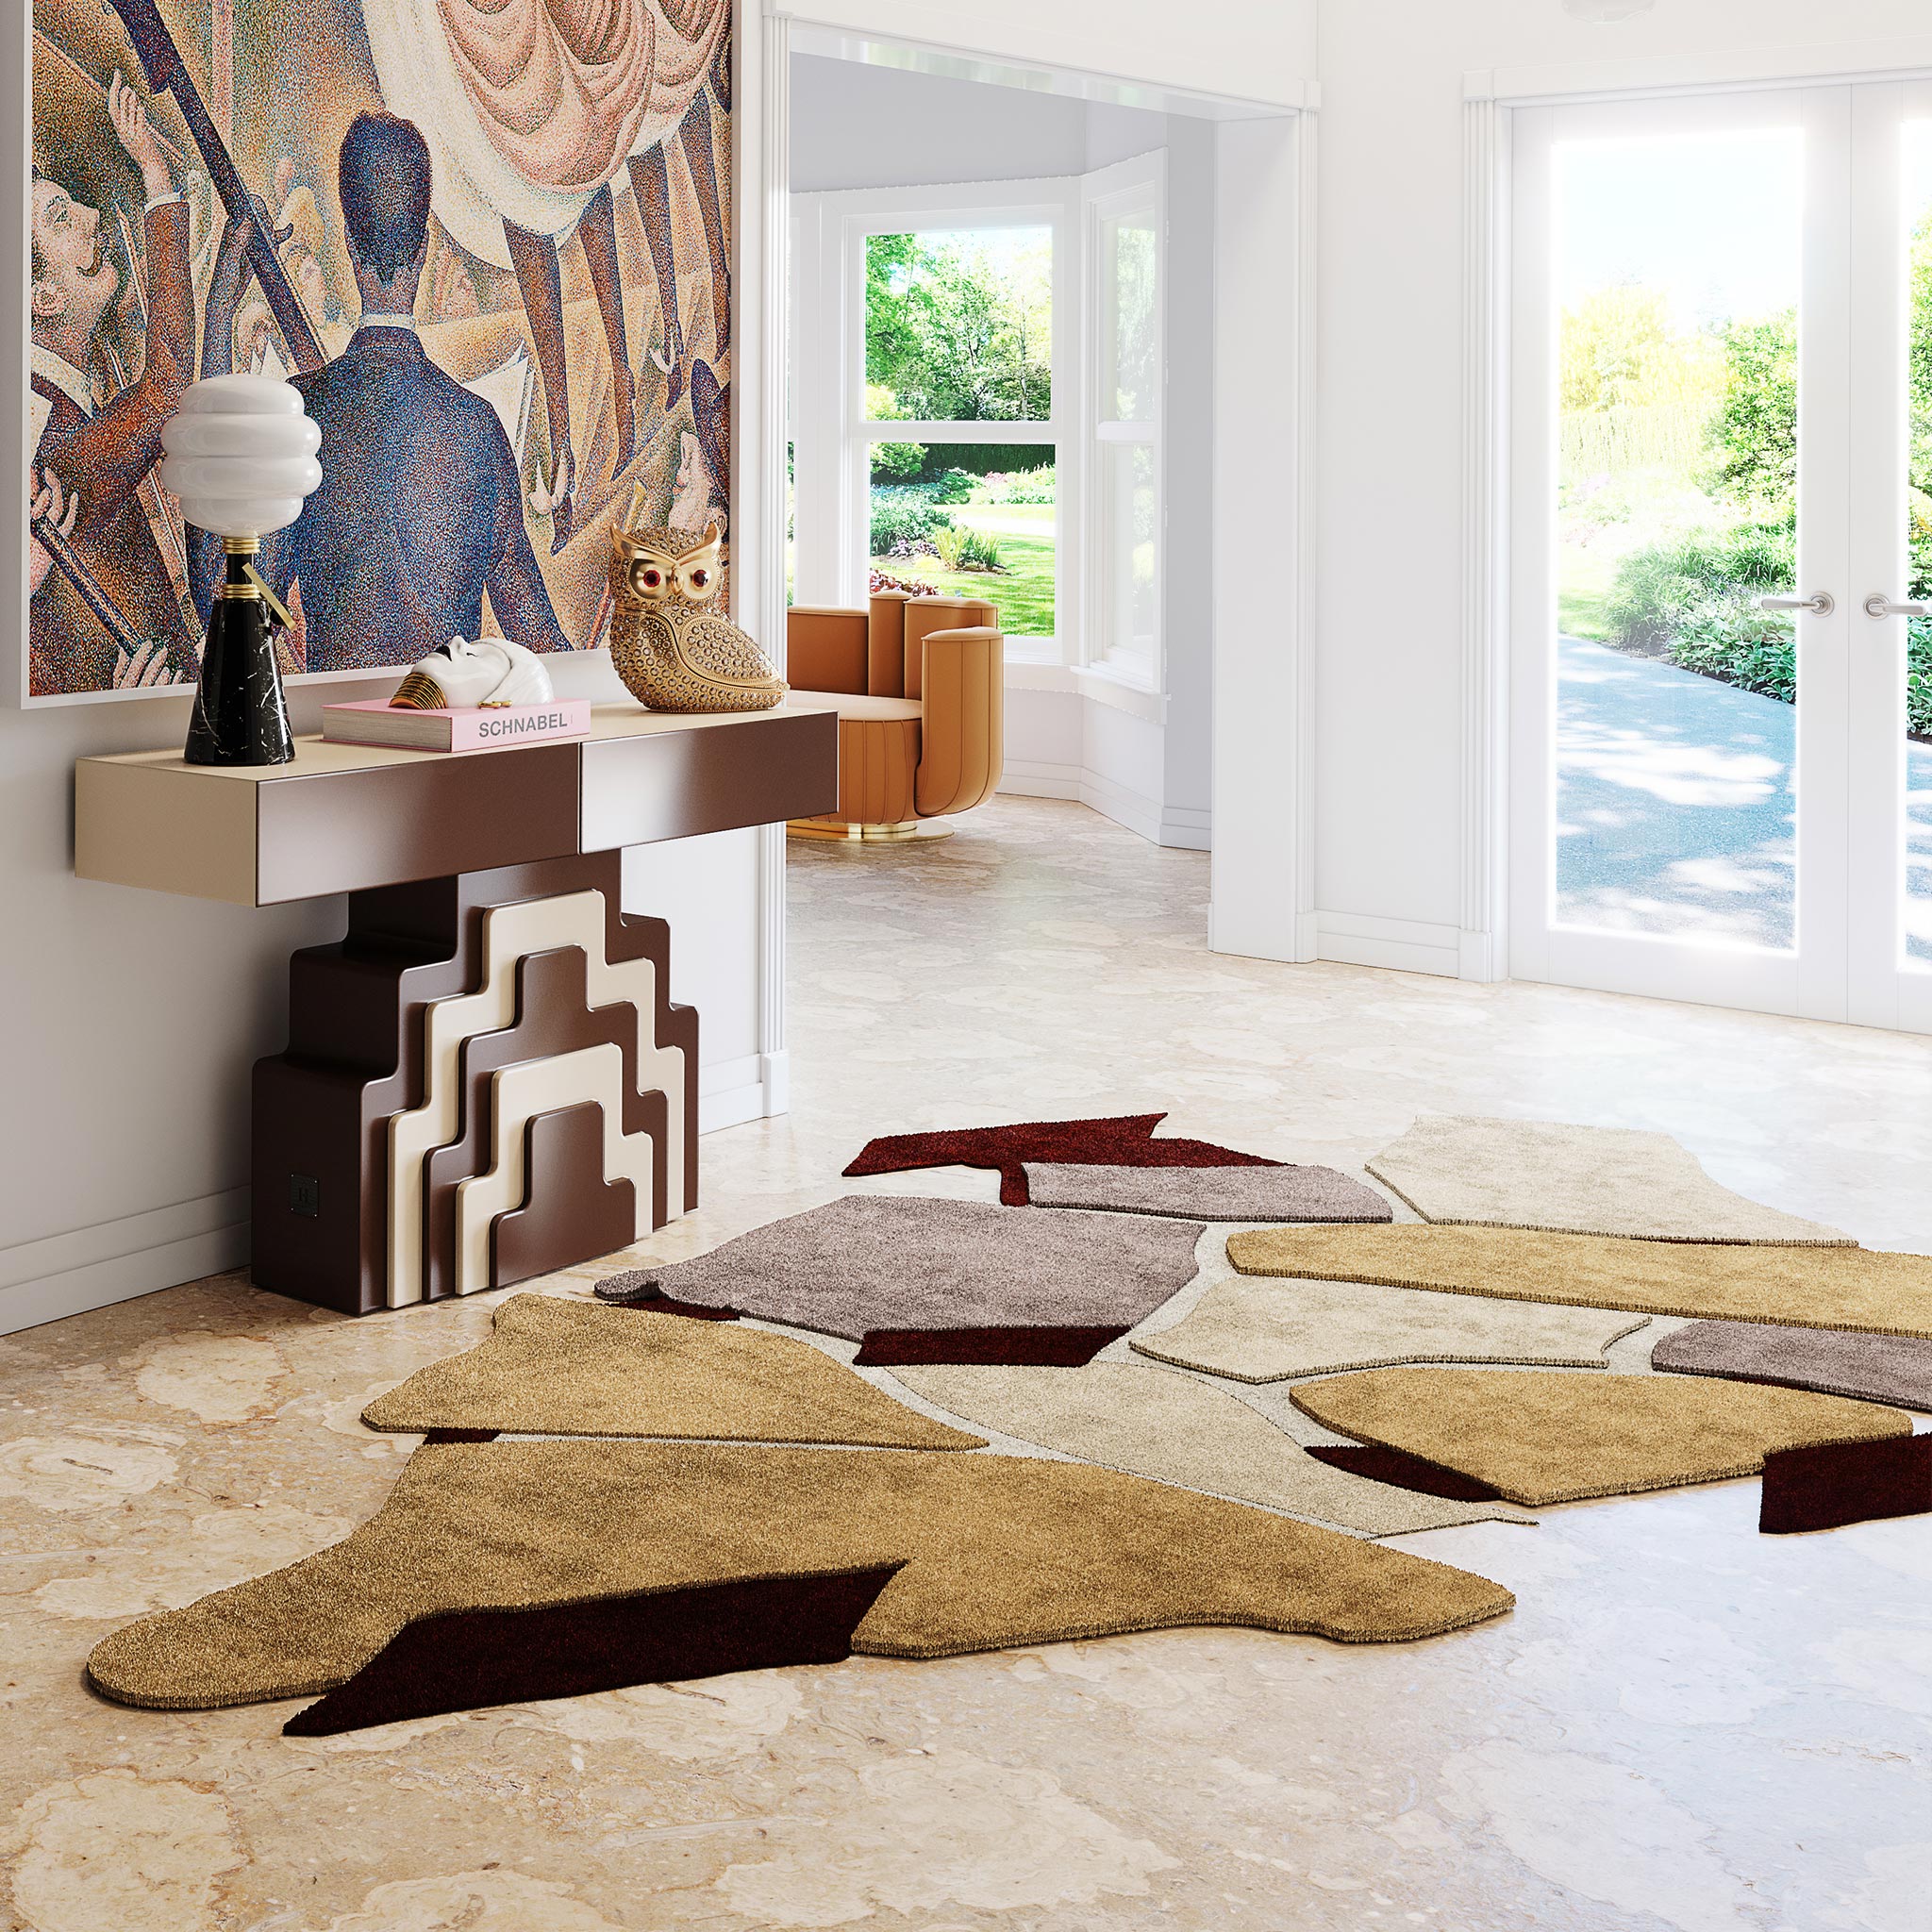 Furniture decor deas for hall entrance with rug by Hommés Studio